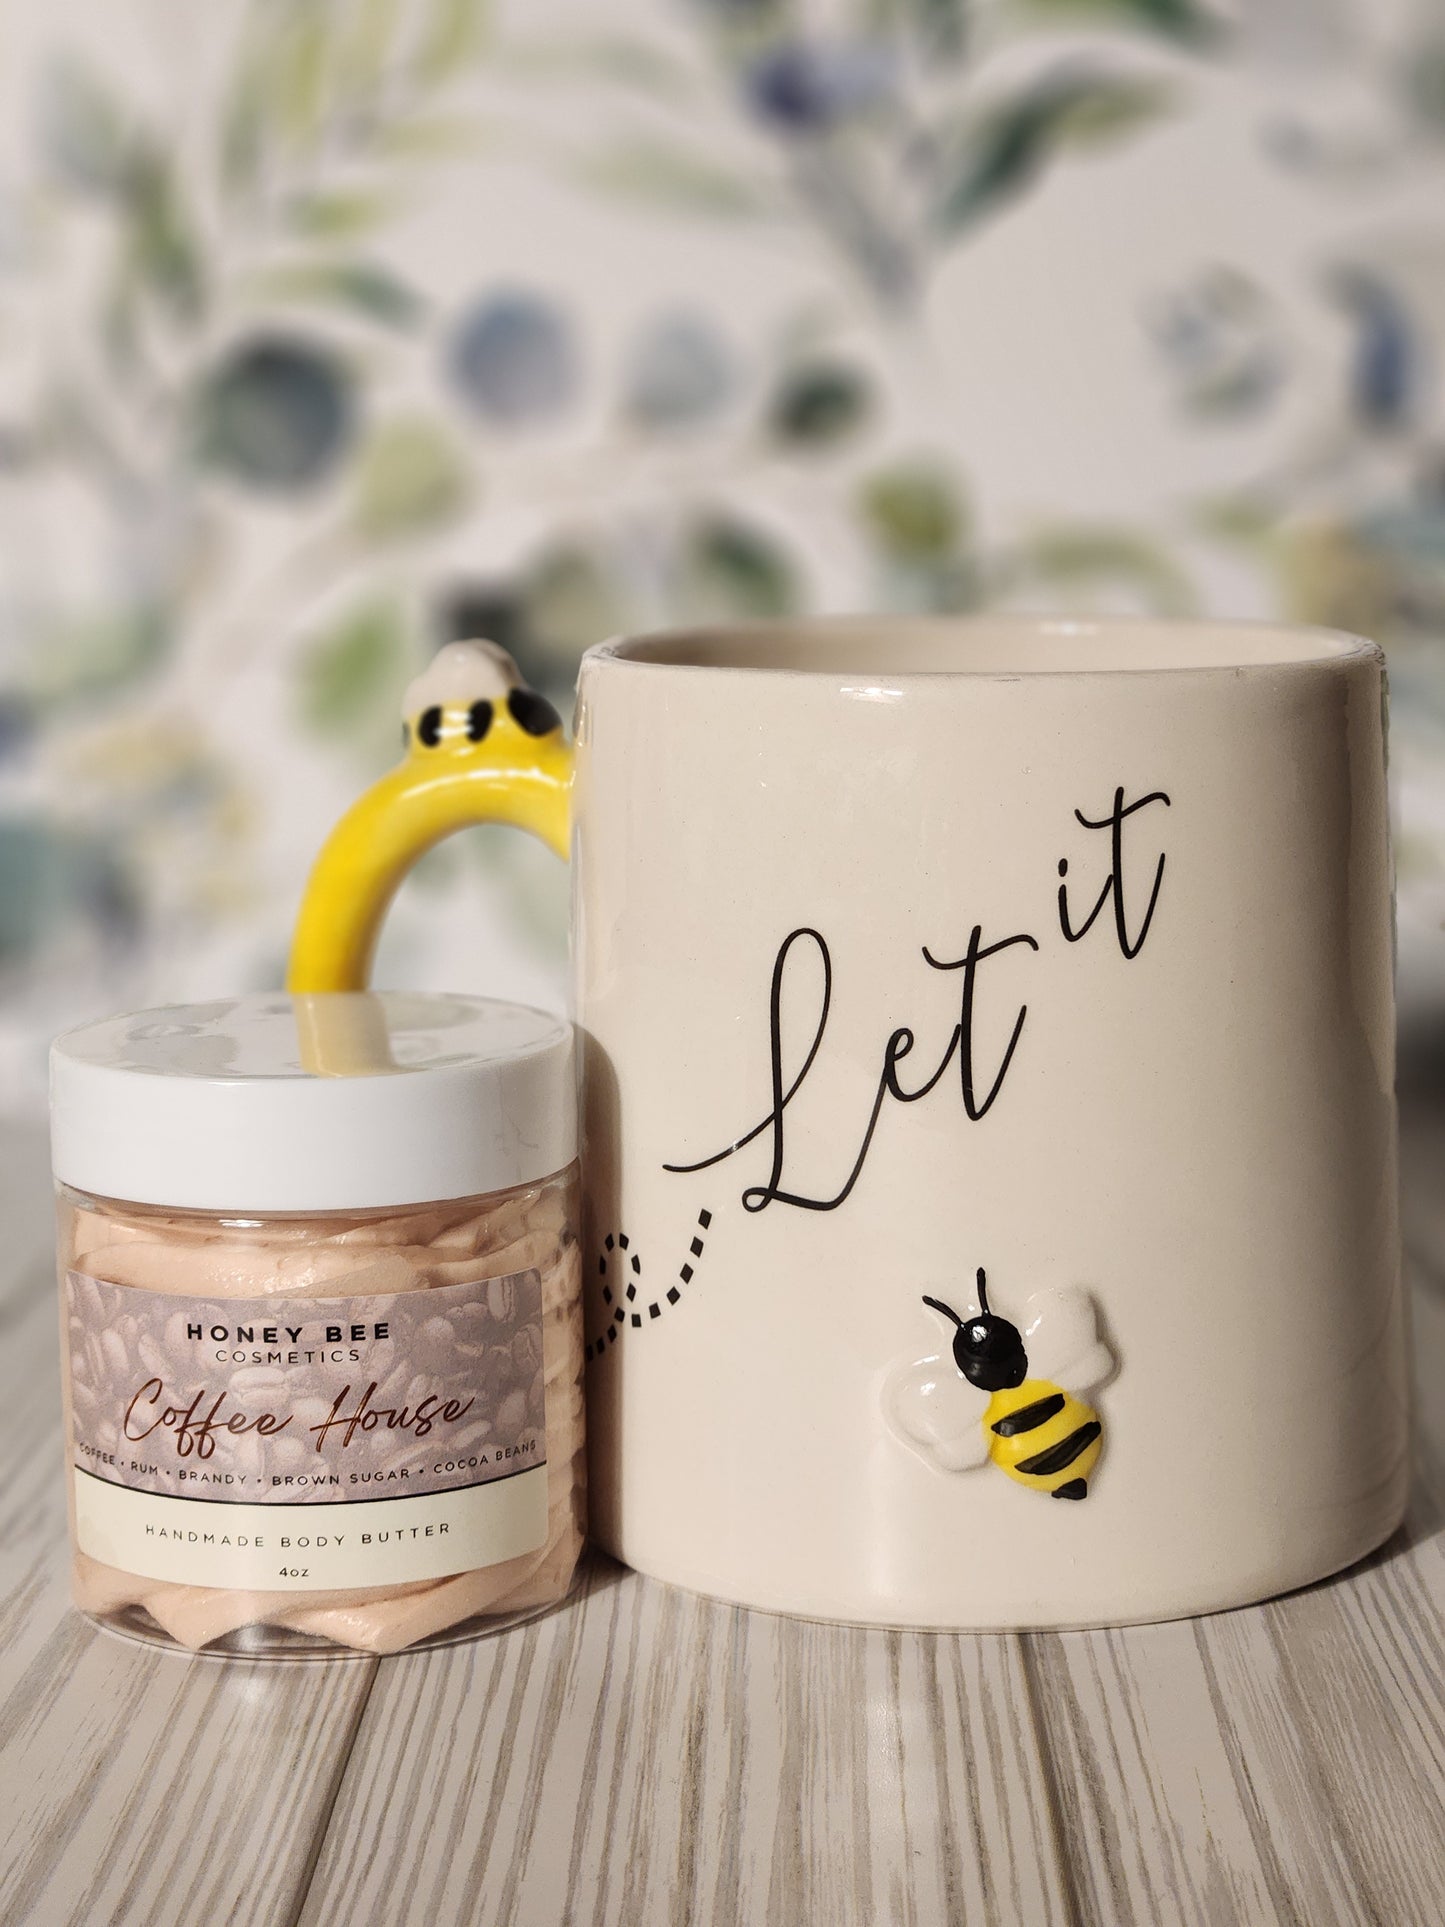 Coffee House Body Butter